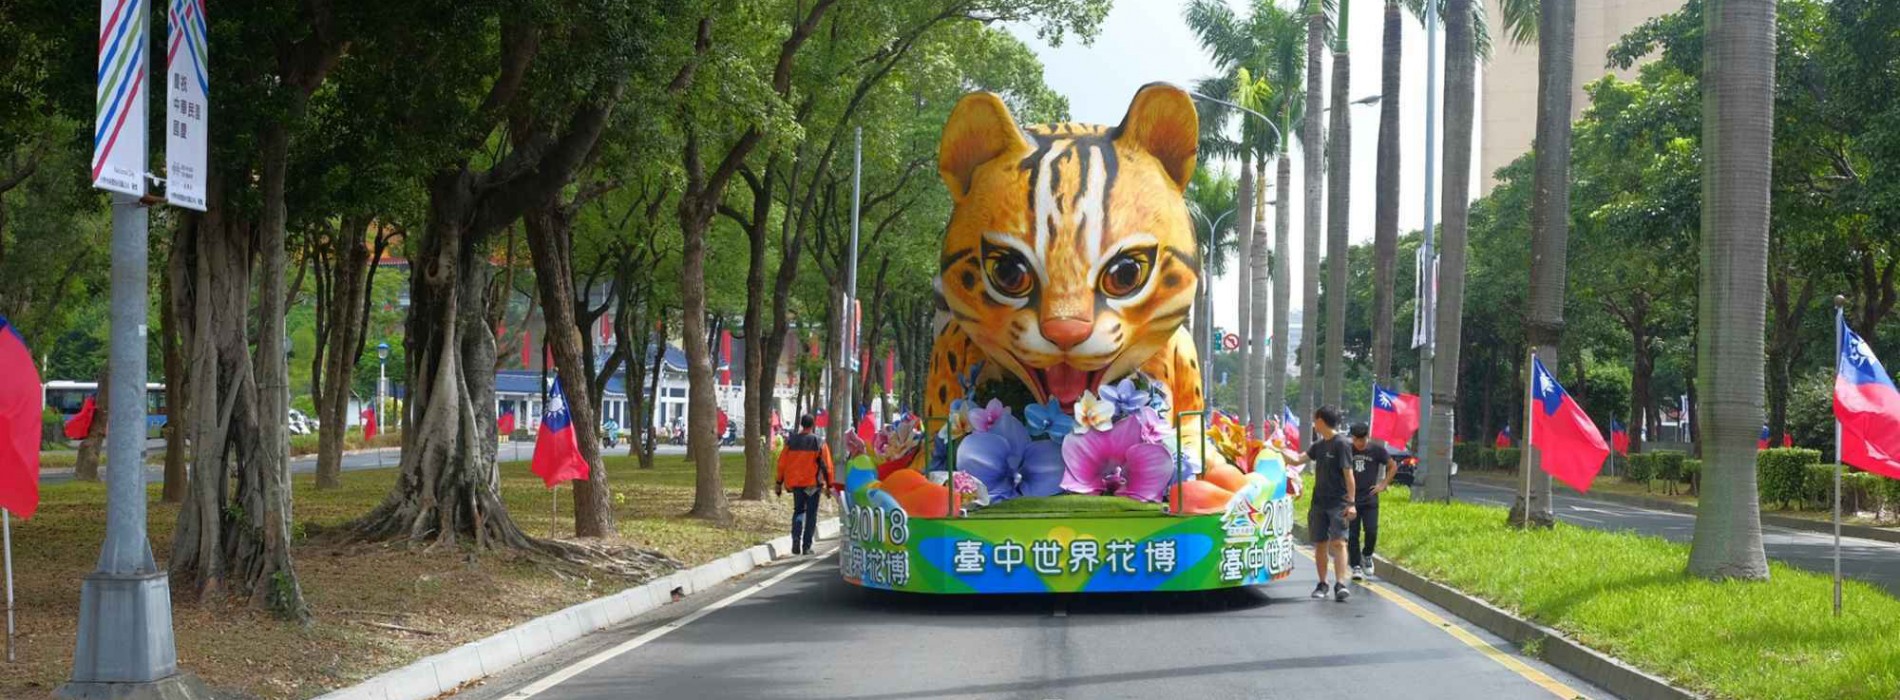 Taichung World Flora Expo 2018 to be held from 3 November